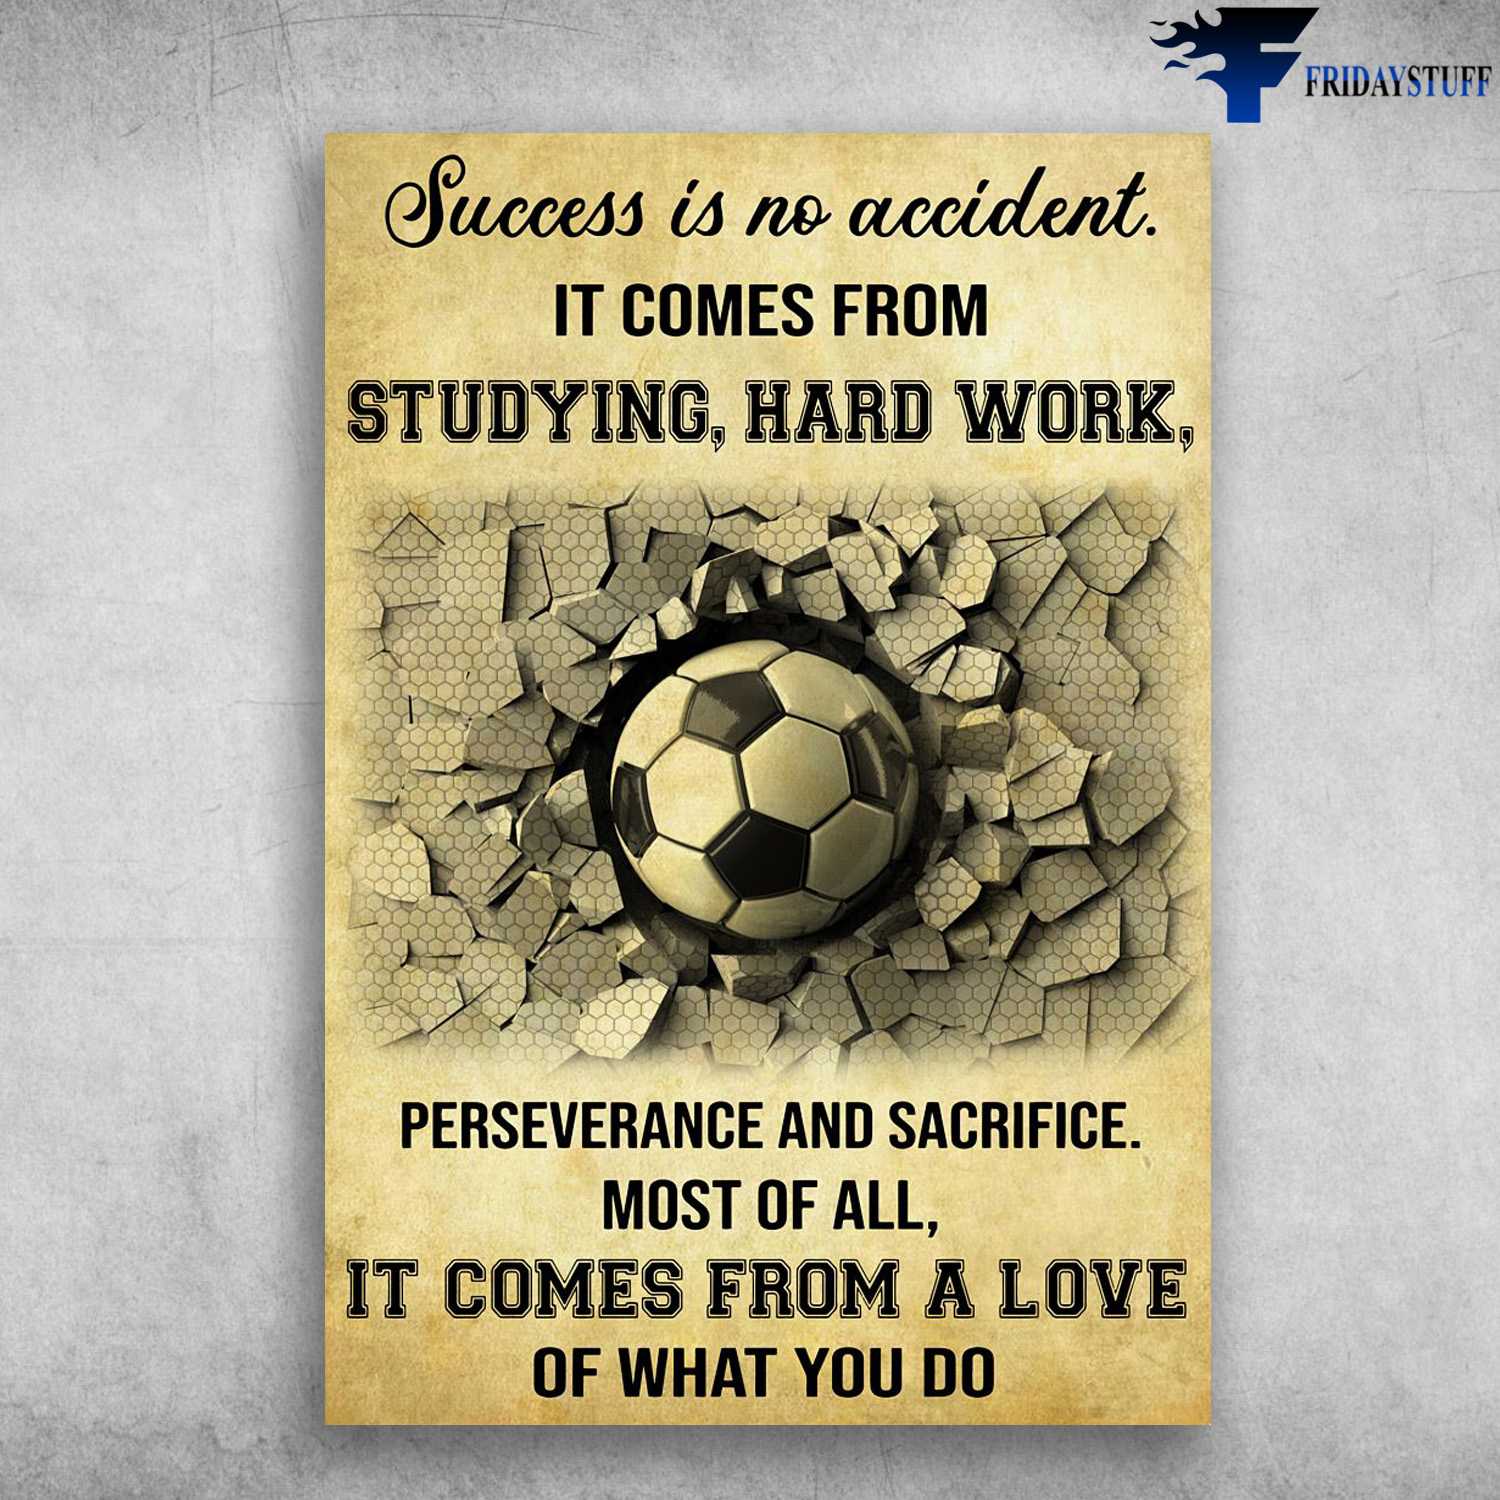 Soccer Lover, Soccer Poster, Success Is No Accident, It Comes From Studying, Hard Work, Perseverance And Sacrifice, Most Of All, It Comes From A Love, Of What You Do